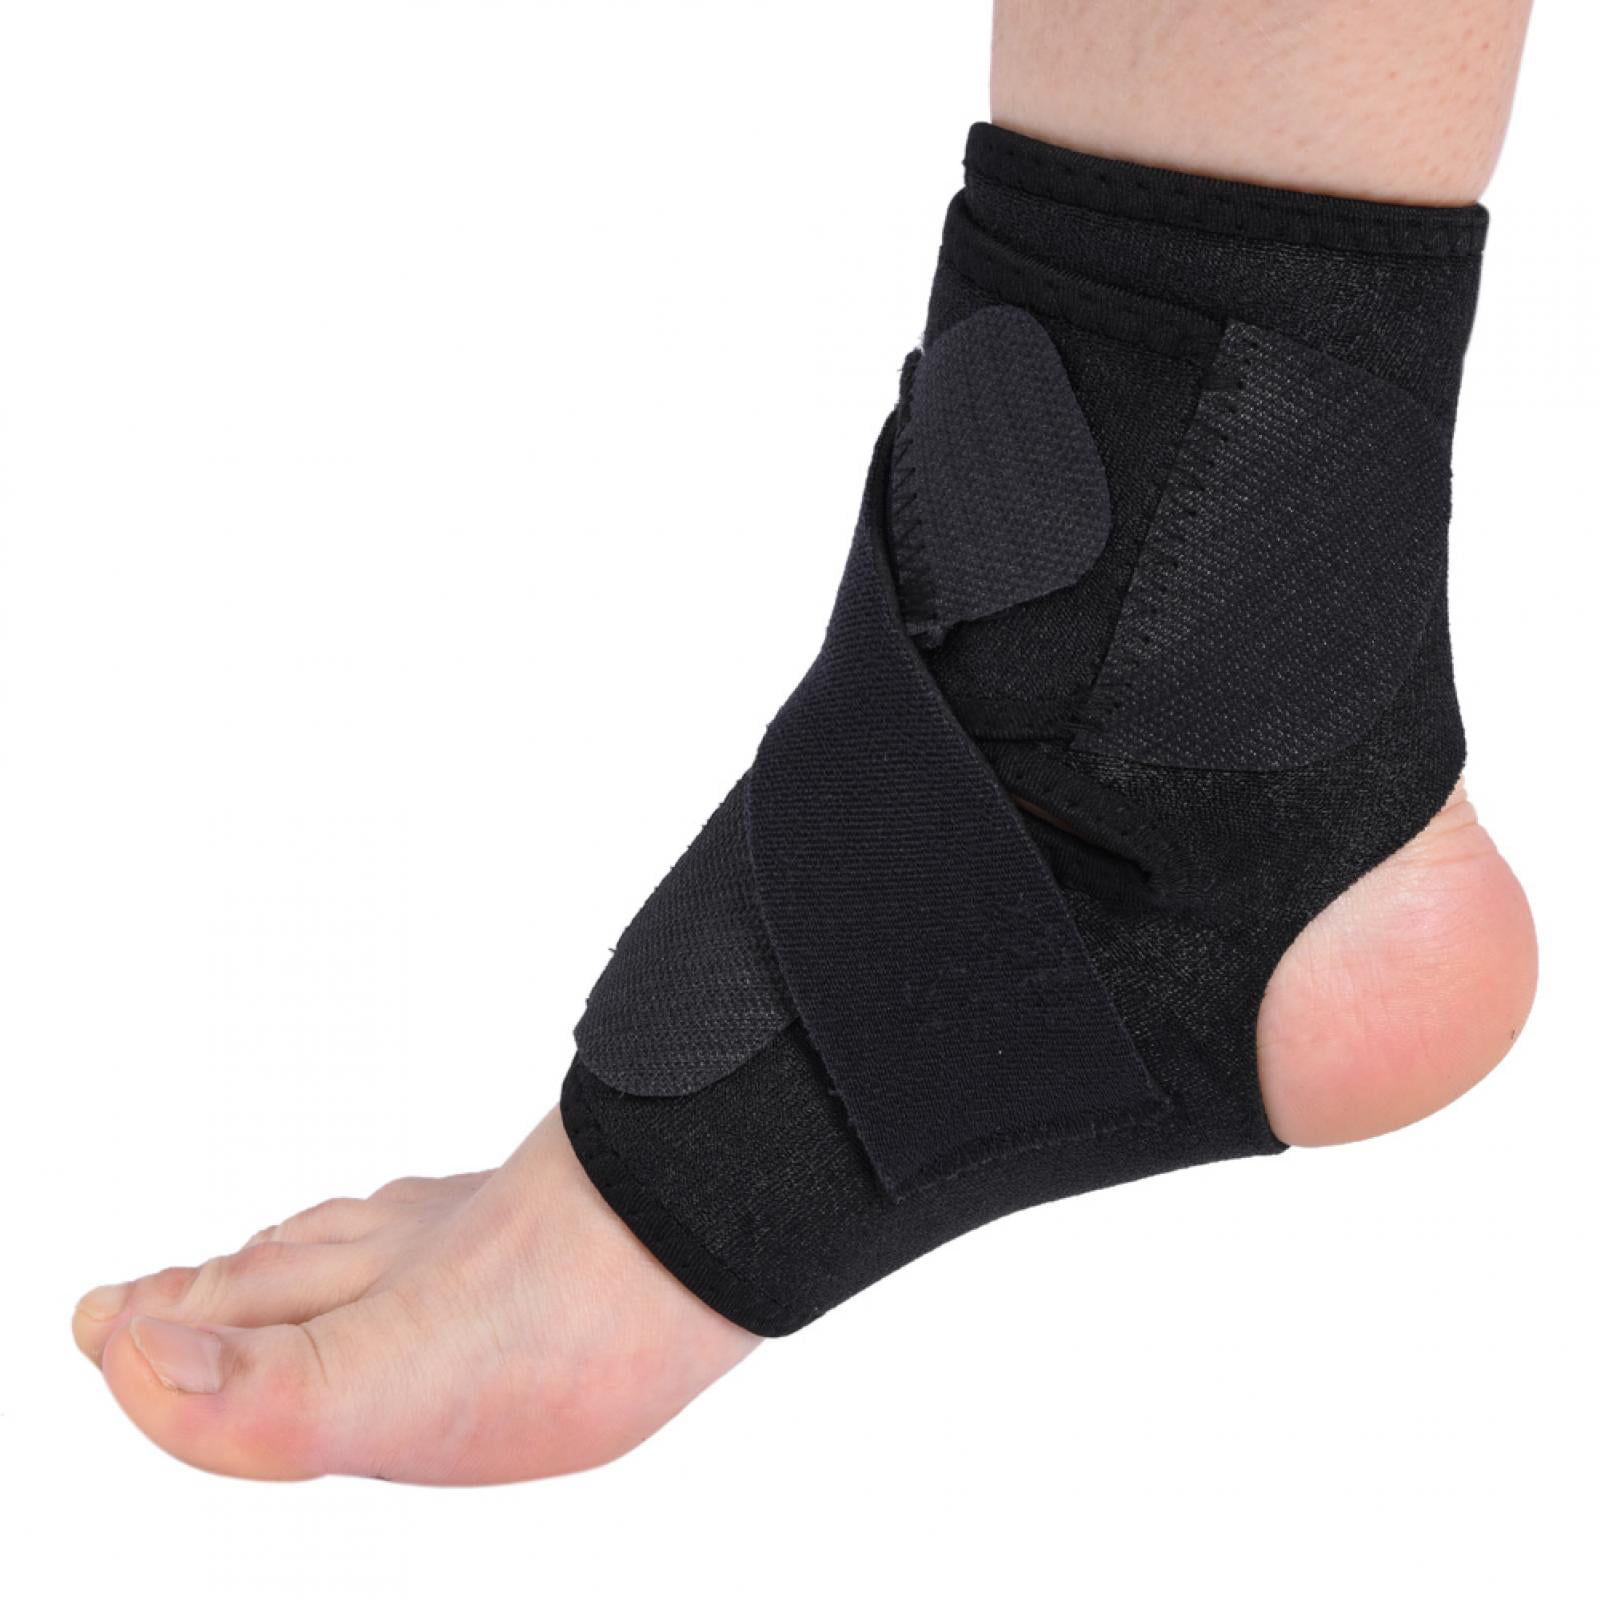 Children Ankle Support Ankle Compression Sleeve for Ice Skating Dance Hiking Running Cycling Football Volleyball Sborter Kids Ankle Brace 1 Pair 